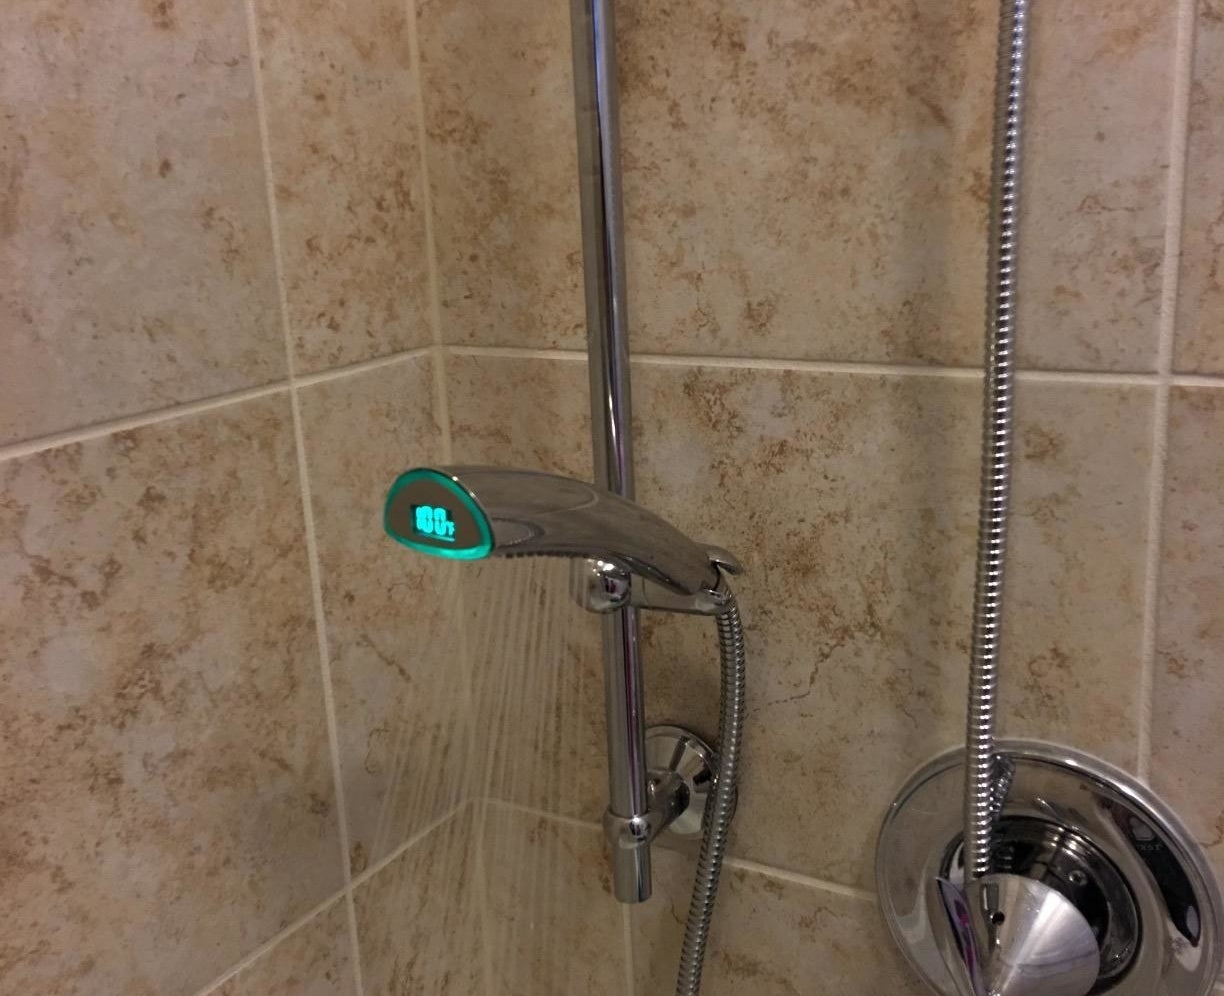 The shower head in use with the temperature displayed